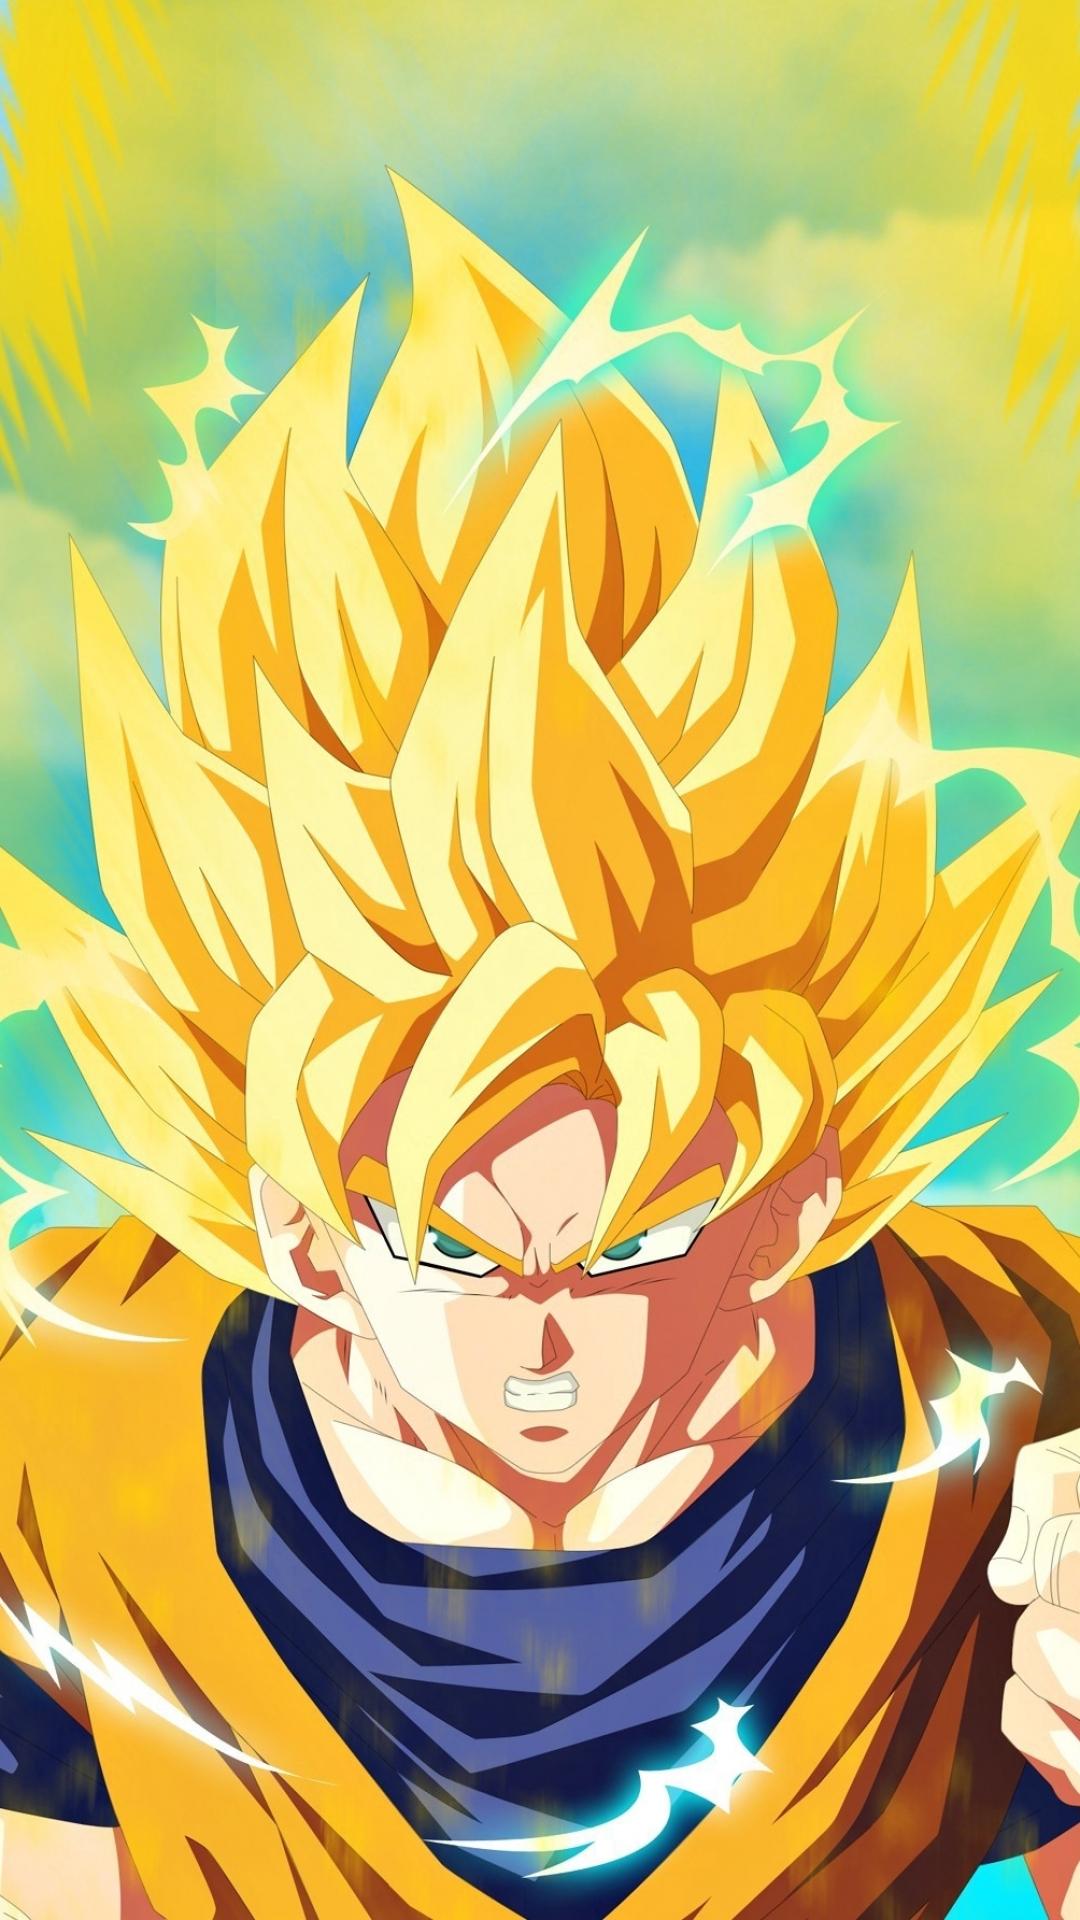 Dragon Ball Z Live Wallpapers on